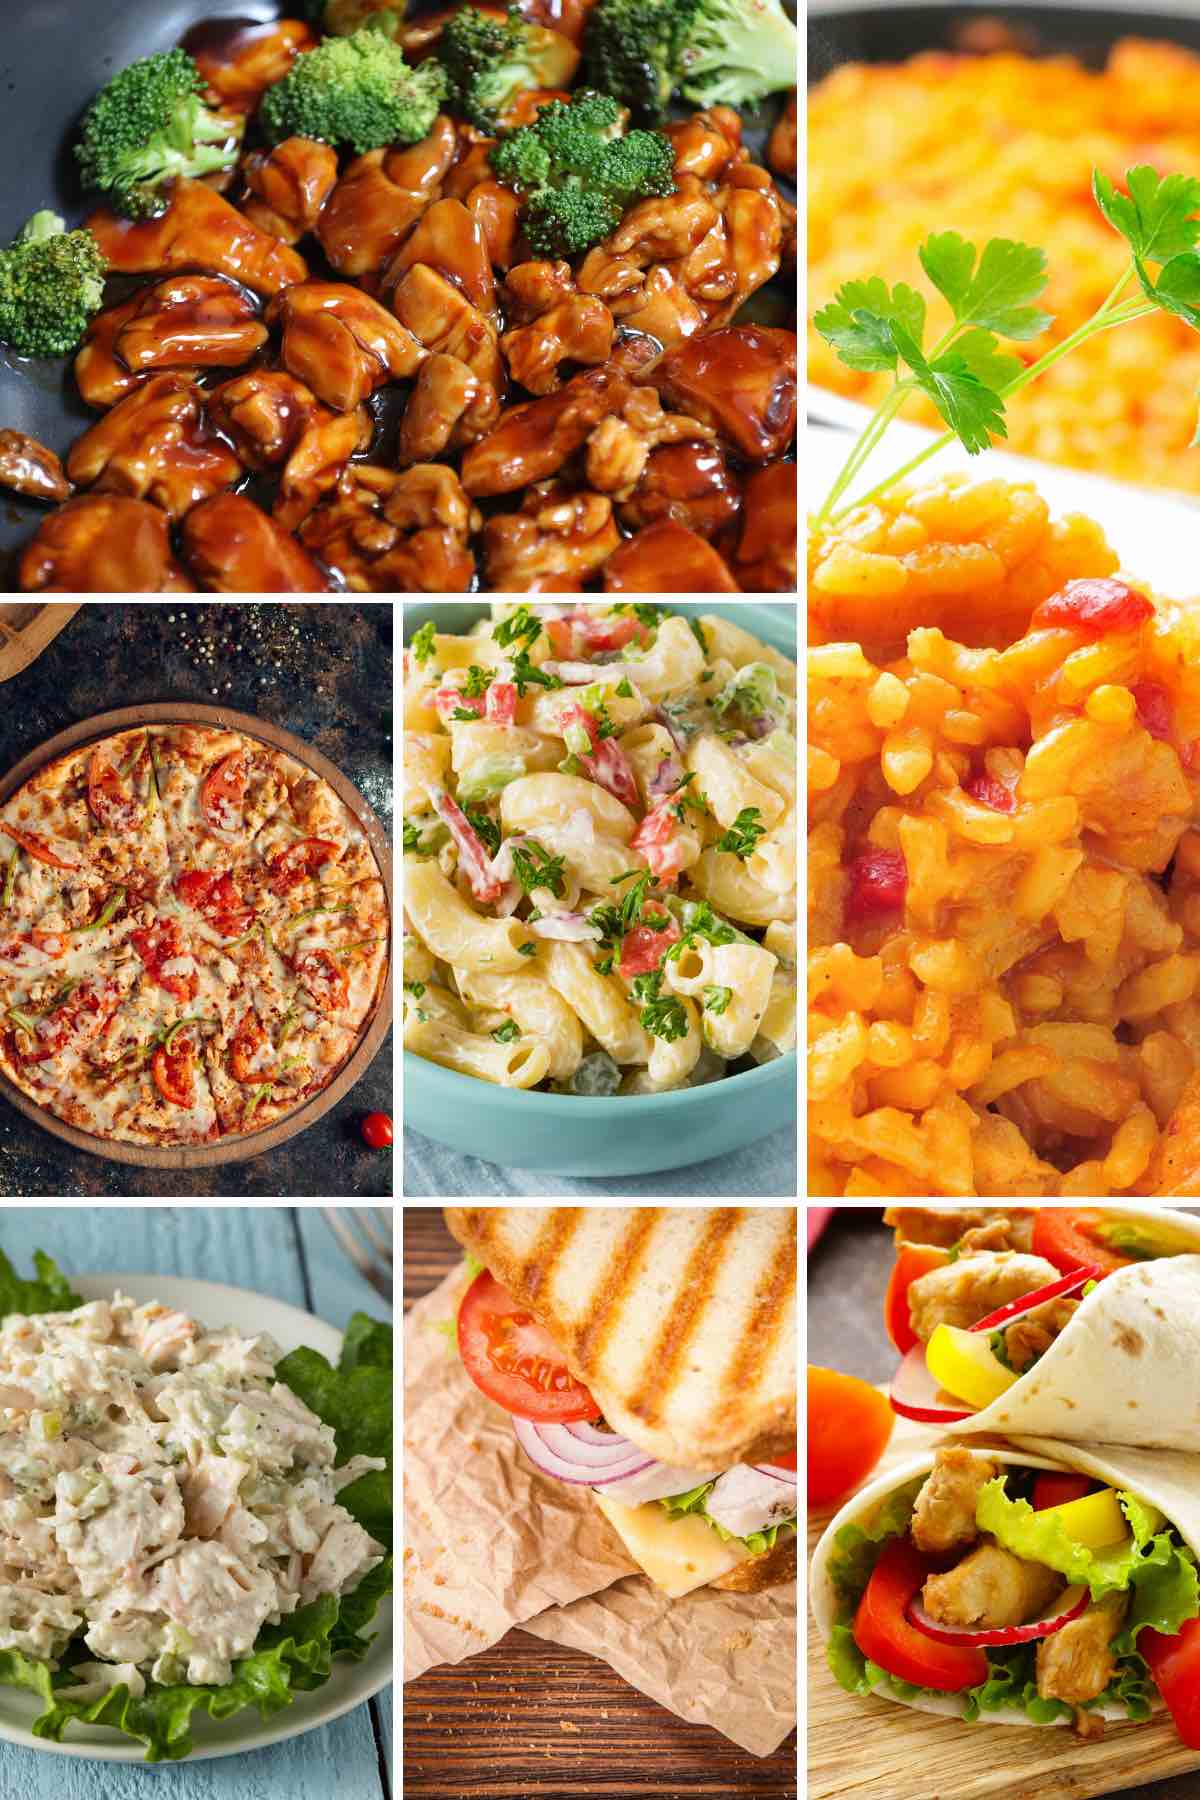 Canned chicken recipes such as stir fry, pizza, sandwiches, and burritos.